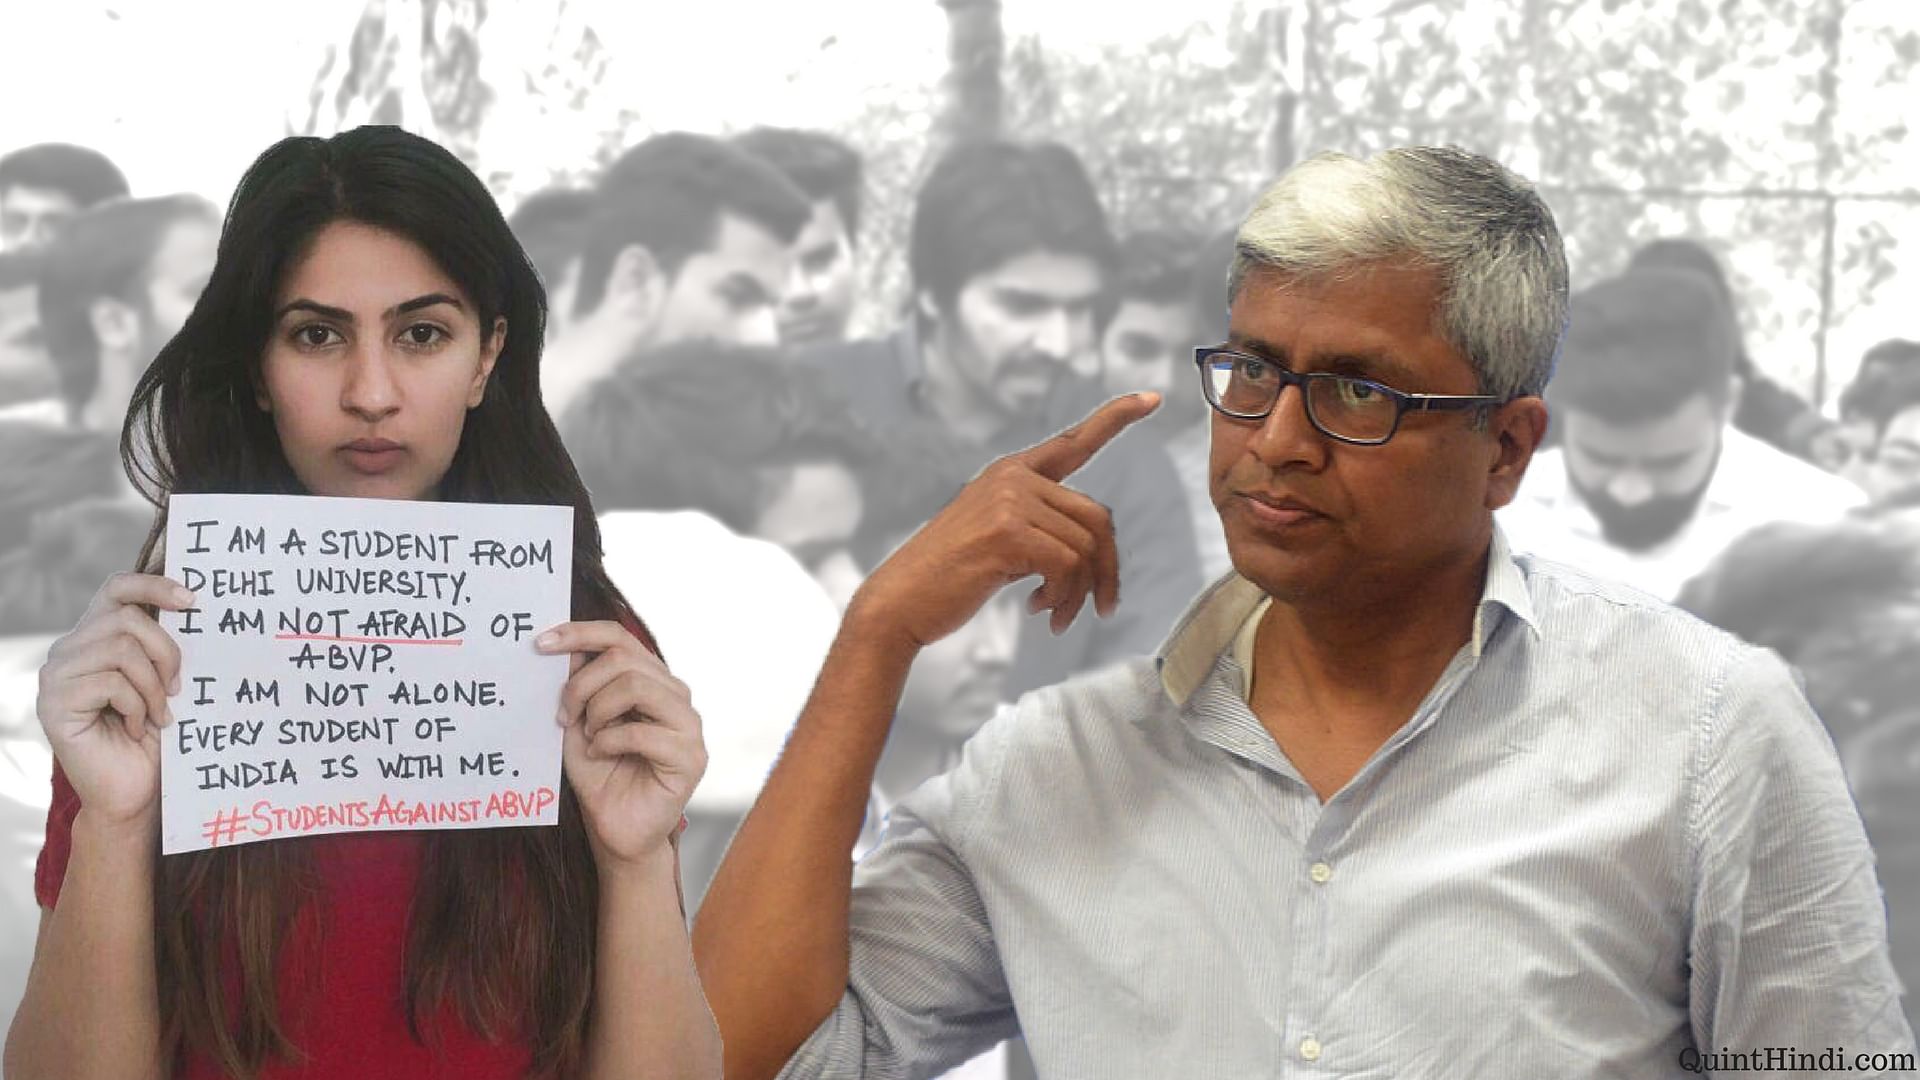 Who – or ‘what’ is Gurmehar Kaur? She is a symbol of dissent, writes Ashutosh. (Photo: Tejas Alhat/<b>The Quint</b>)